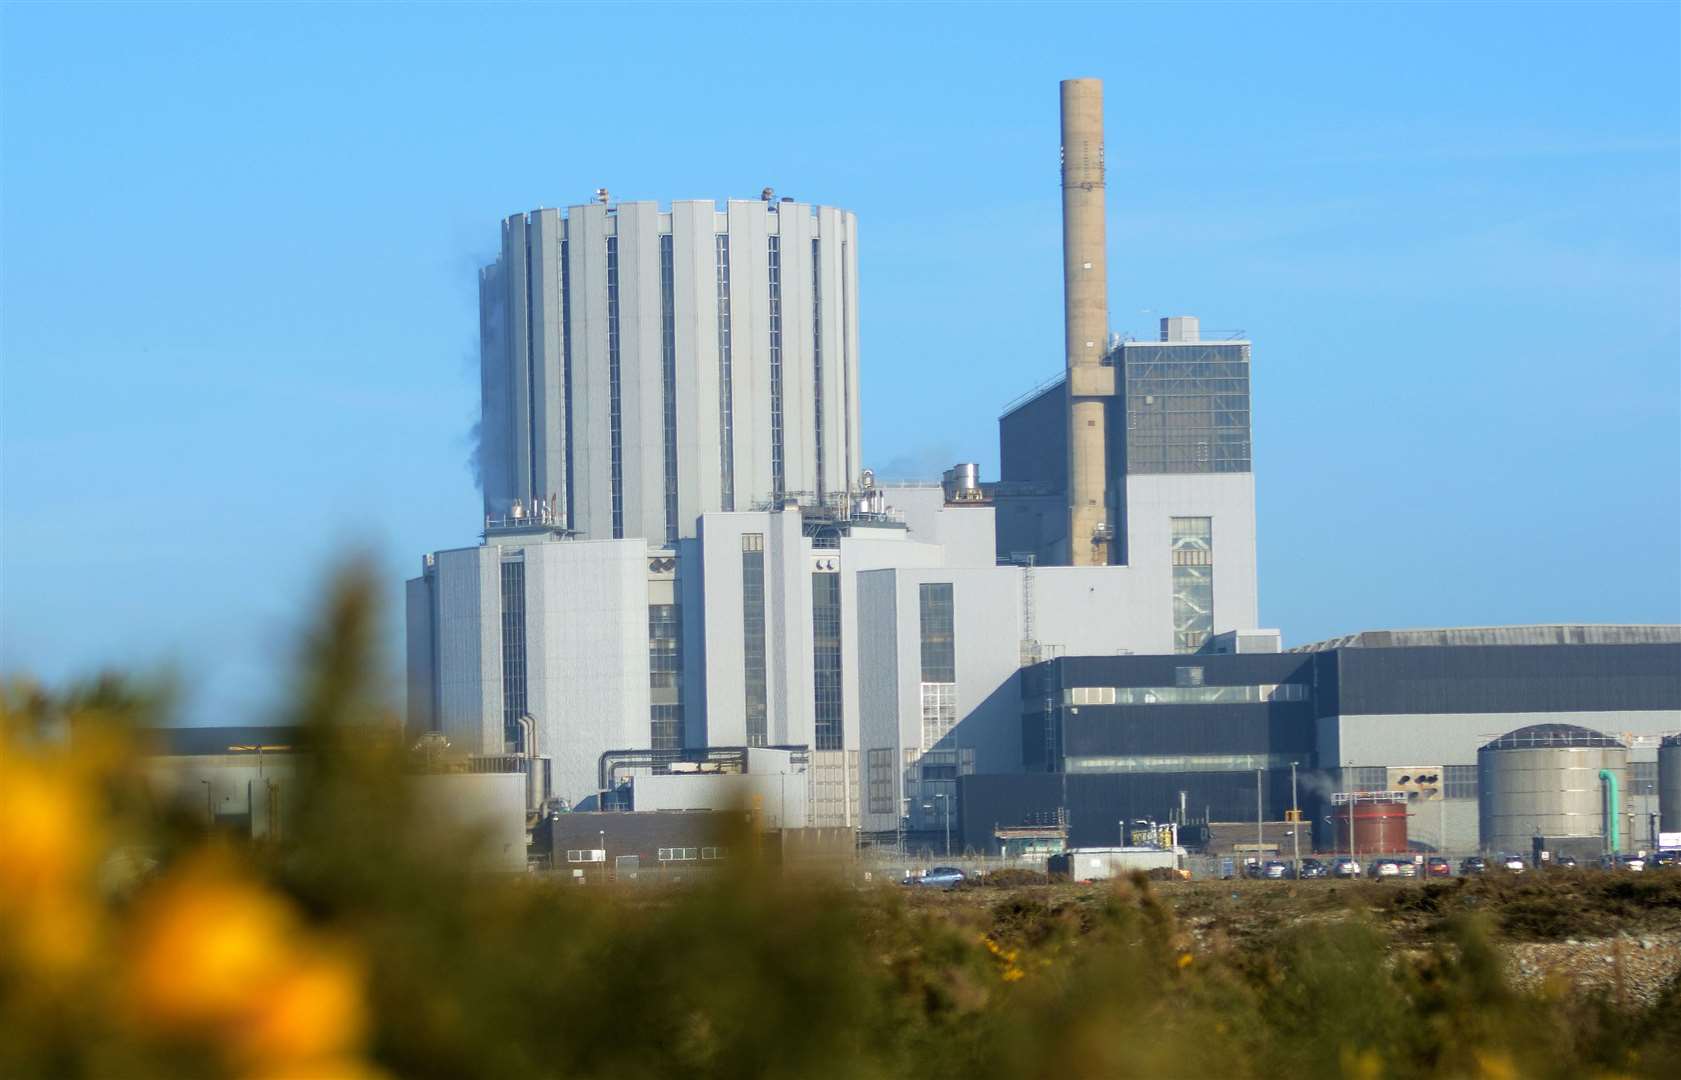 Dungeness B nuclear power station is now in the defueling stage